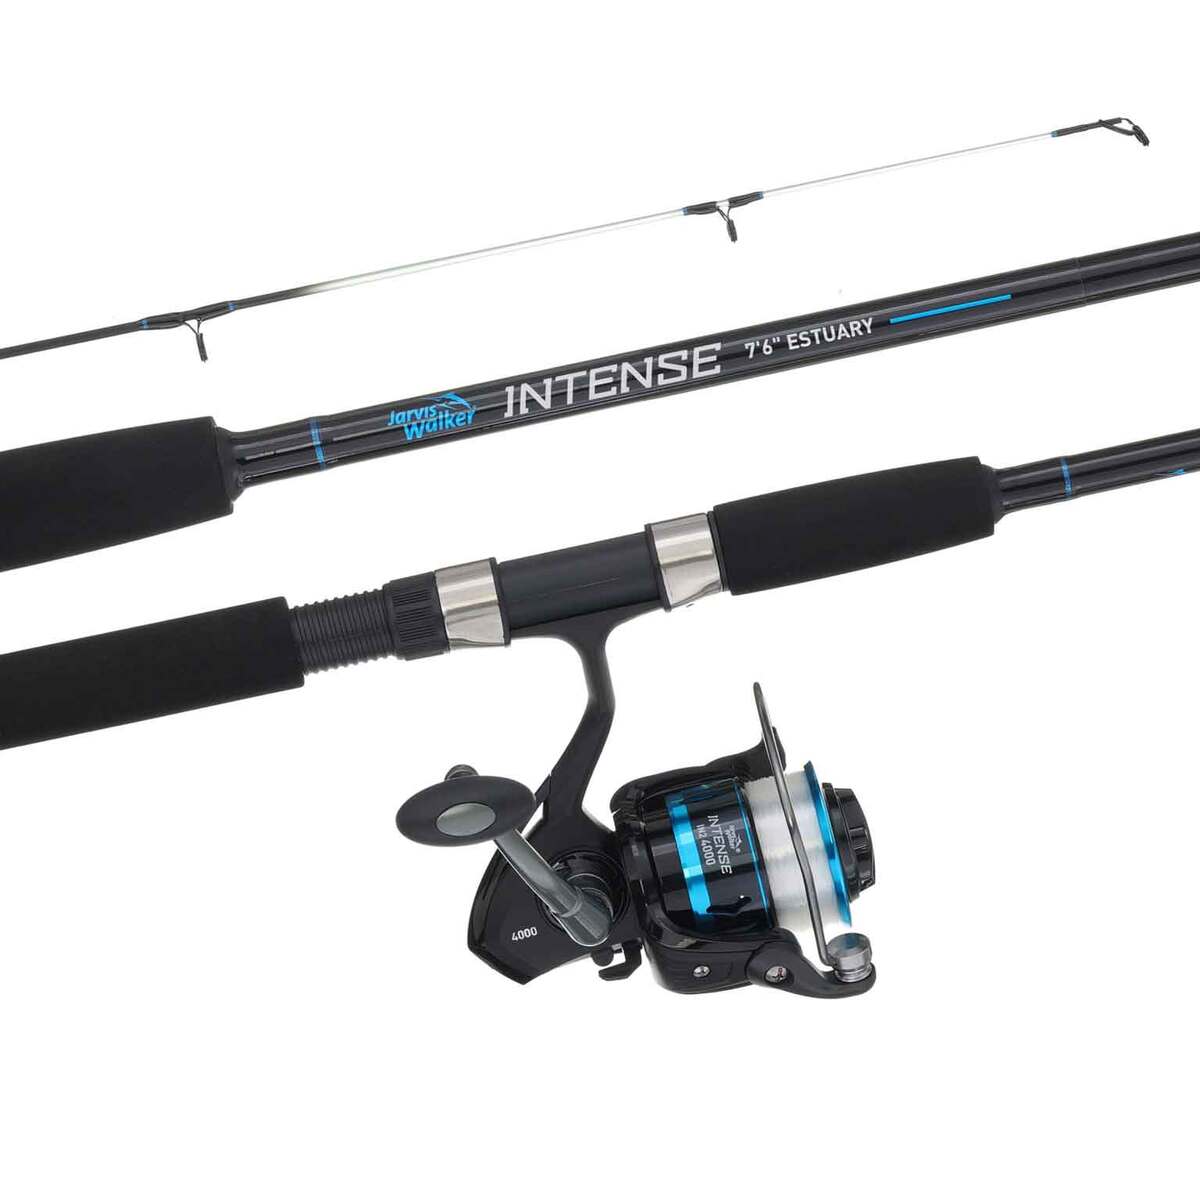 Jarvis Walker Intense 7'6 Estuary 2Pce with 4000 Reel Combo 7'6 5.2:1 |  Outback Equipment